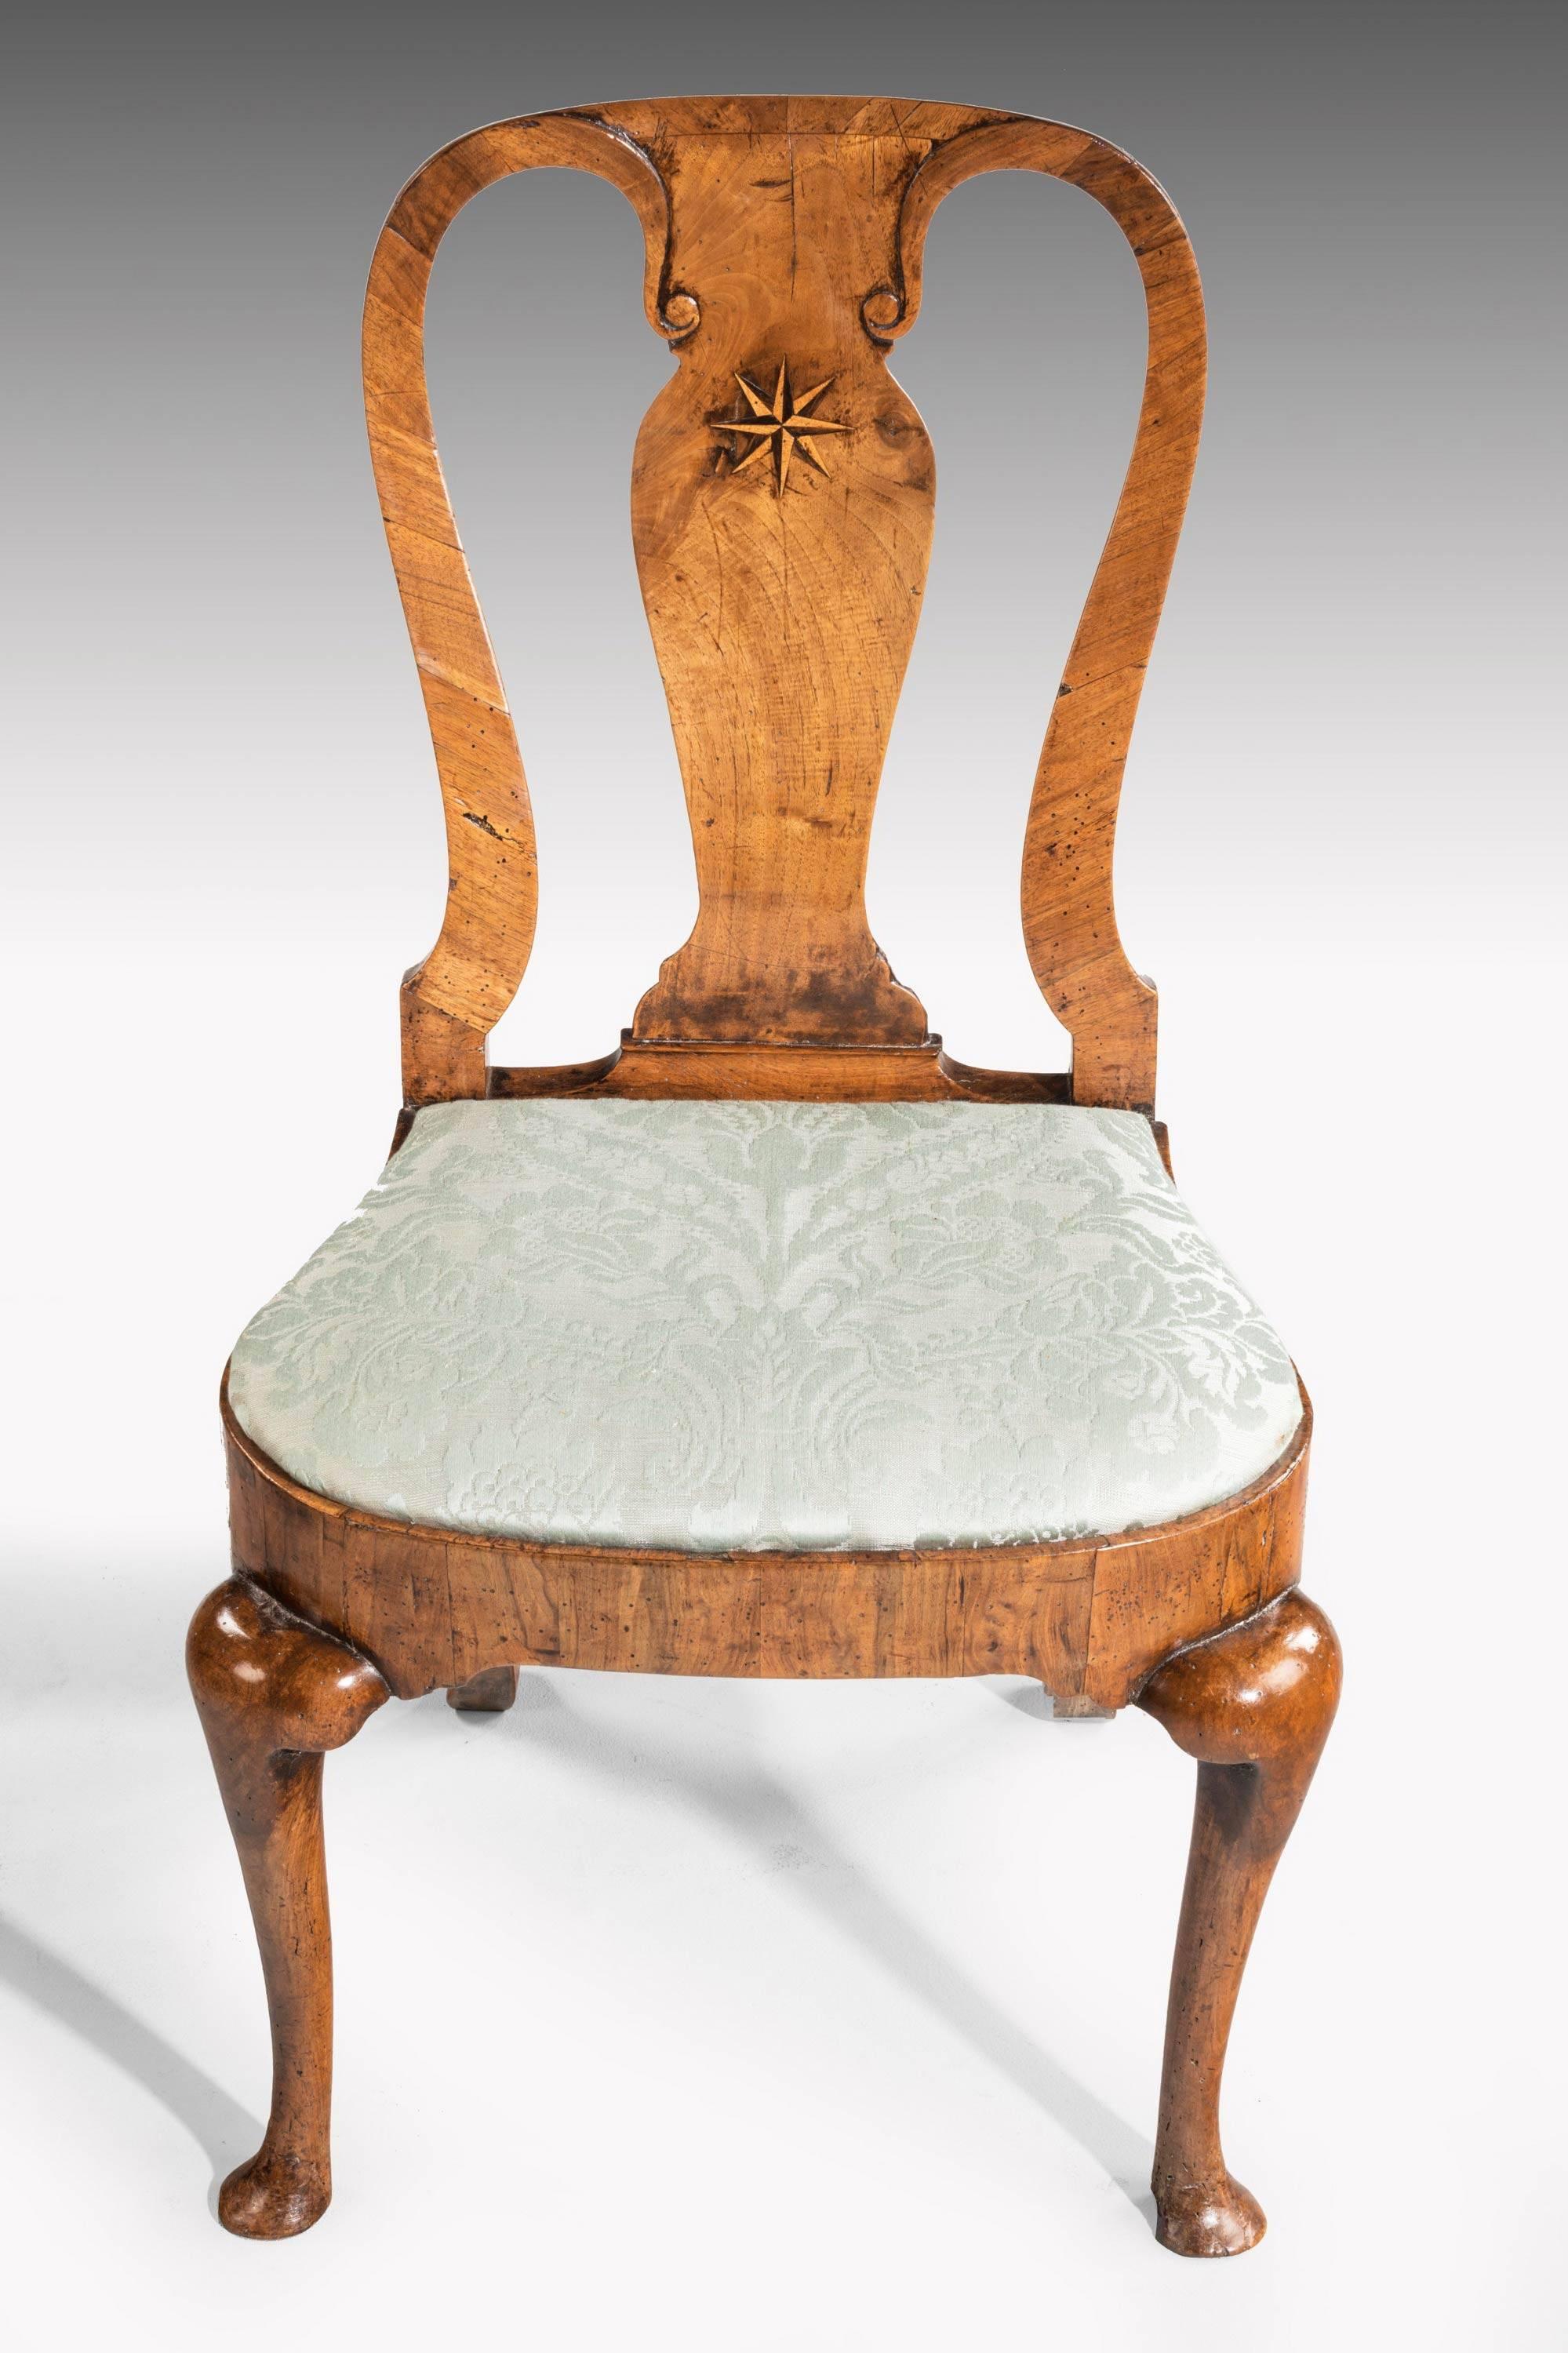 An attractive Queen Anne period walnut single chair. The vase shaped back with boxwood and ebony star inlay. Fine cabriole supports, overall a lovely honey color.

Measures: Seat height 18 inches.

                  